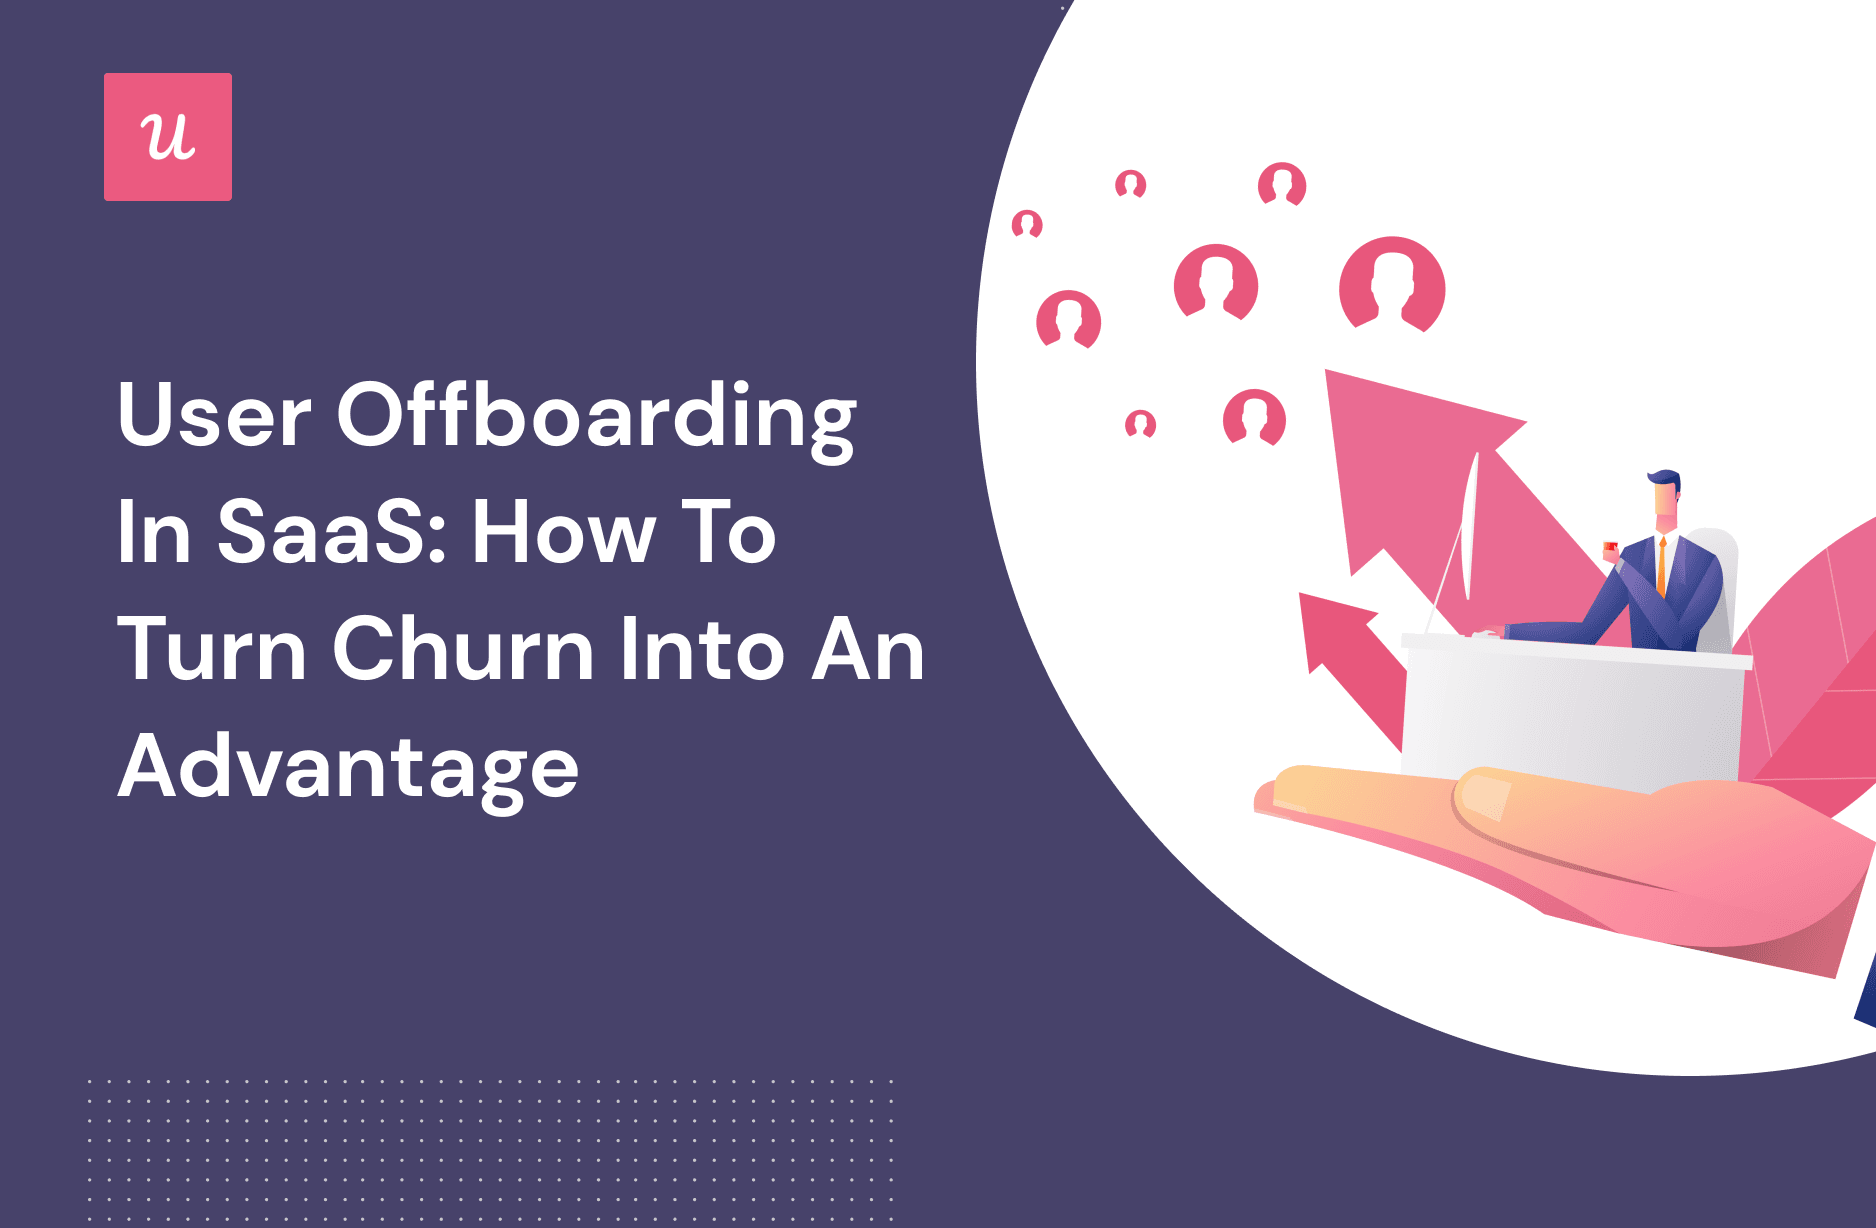 User Offboarding In SaaS: How to Turn Churn Into An Advantage